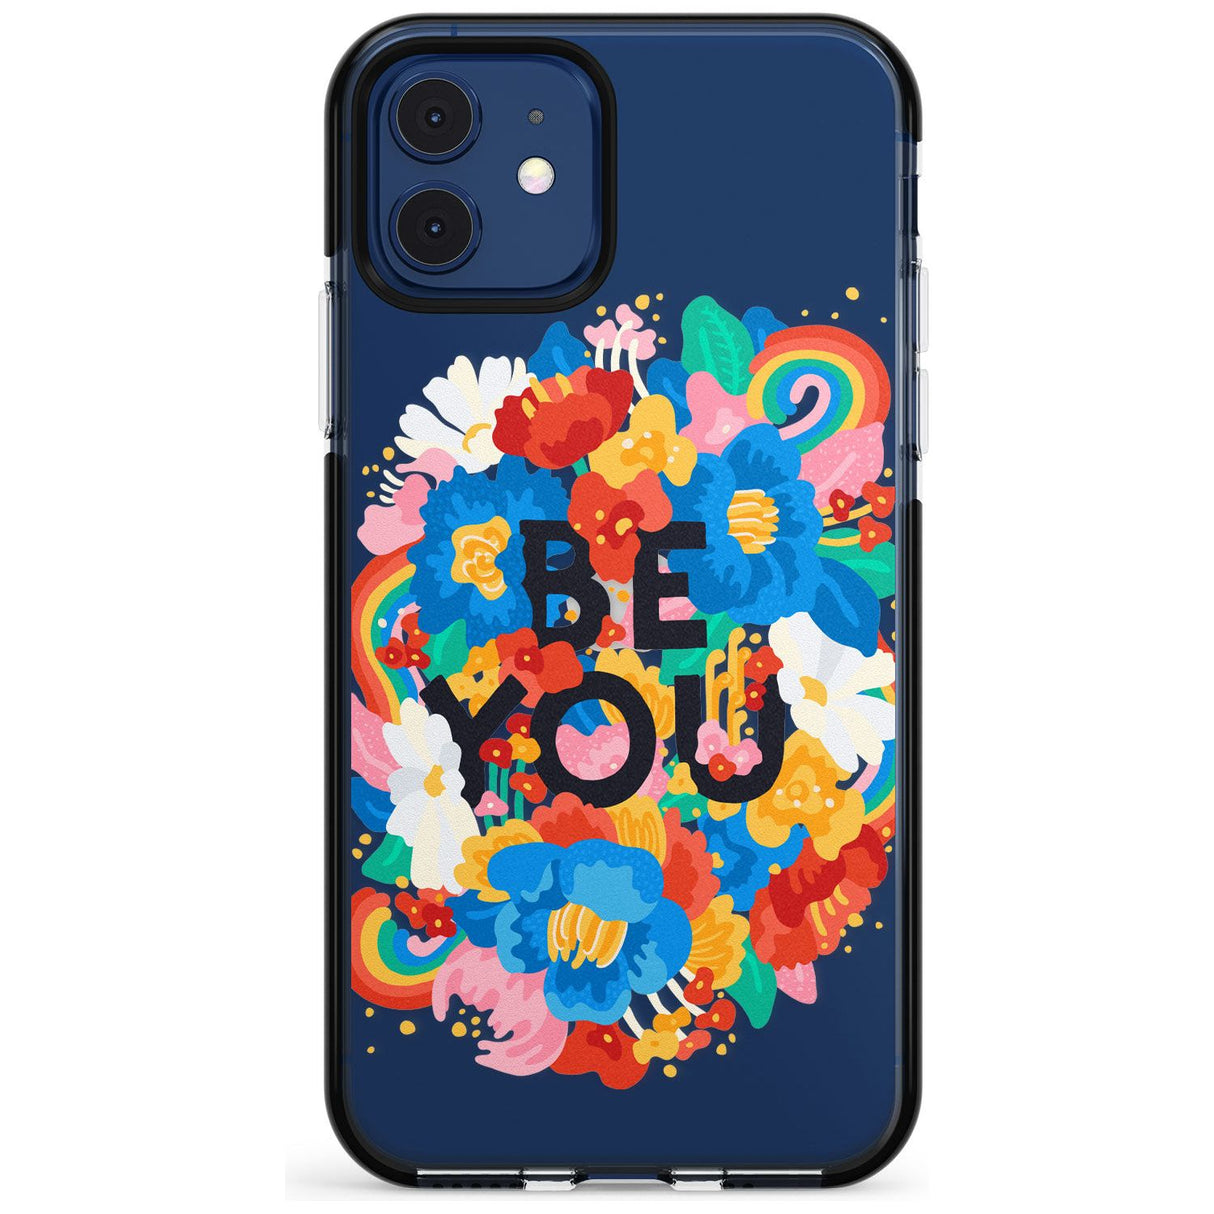 Be You Black Impact Phone Case for iPhone 11 Pro Max